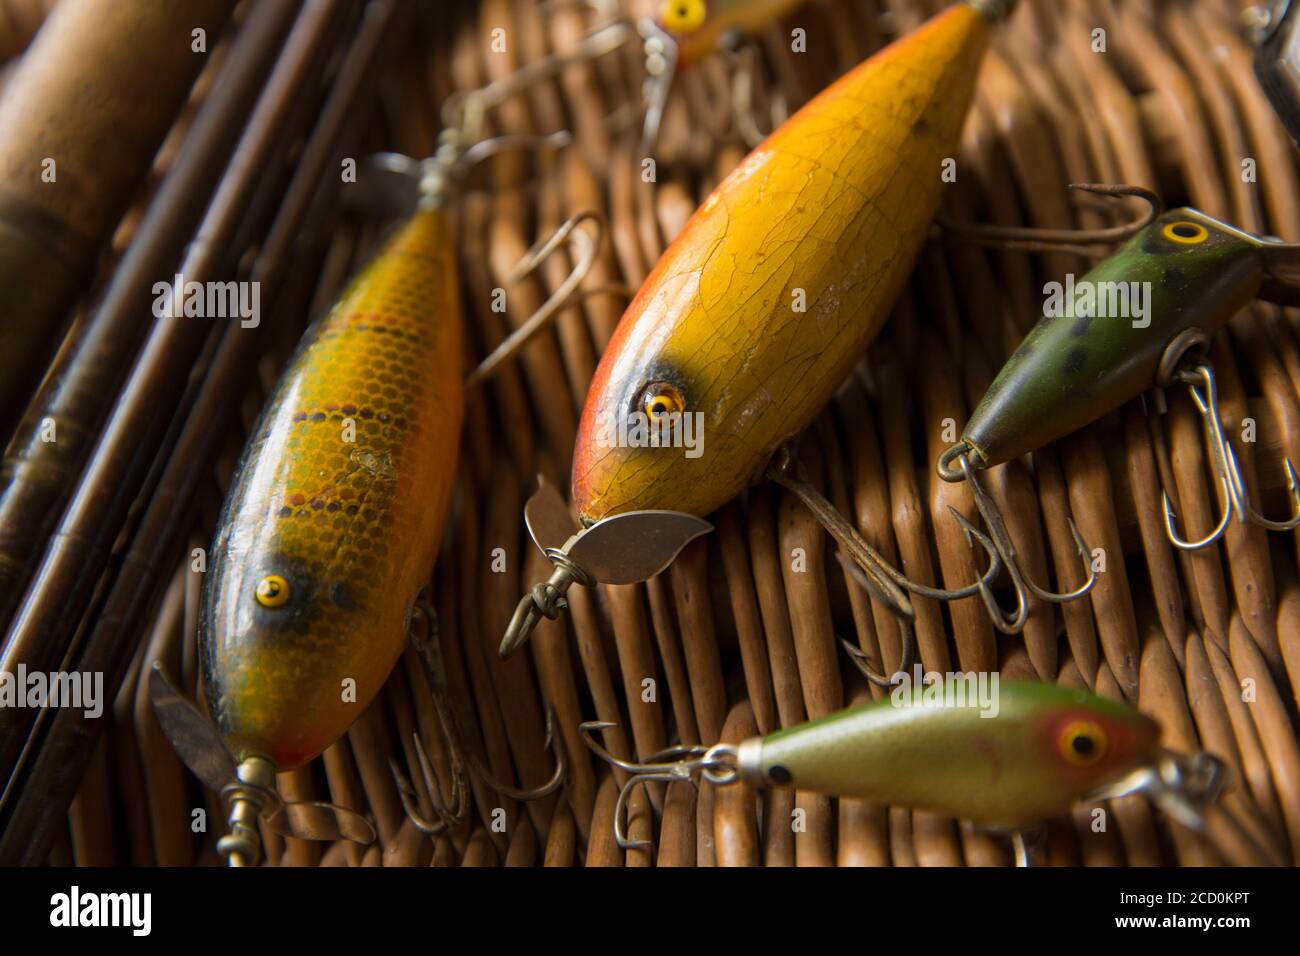 Examples of old South Bend fishing lures, or plugs, to catch predatory fish  displayed on a whicker tackle box. The larger lures are South Bend Stock  Photo - Alamy